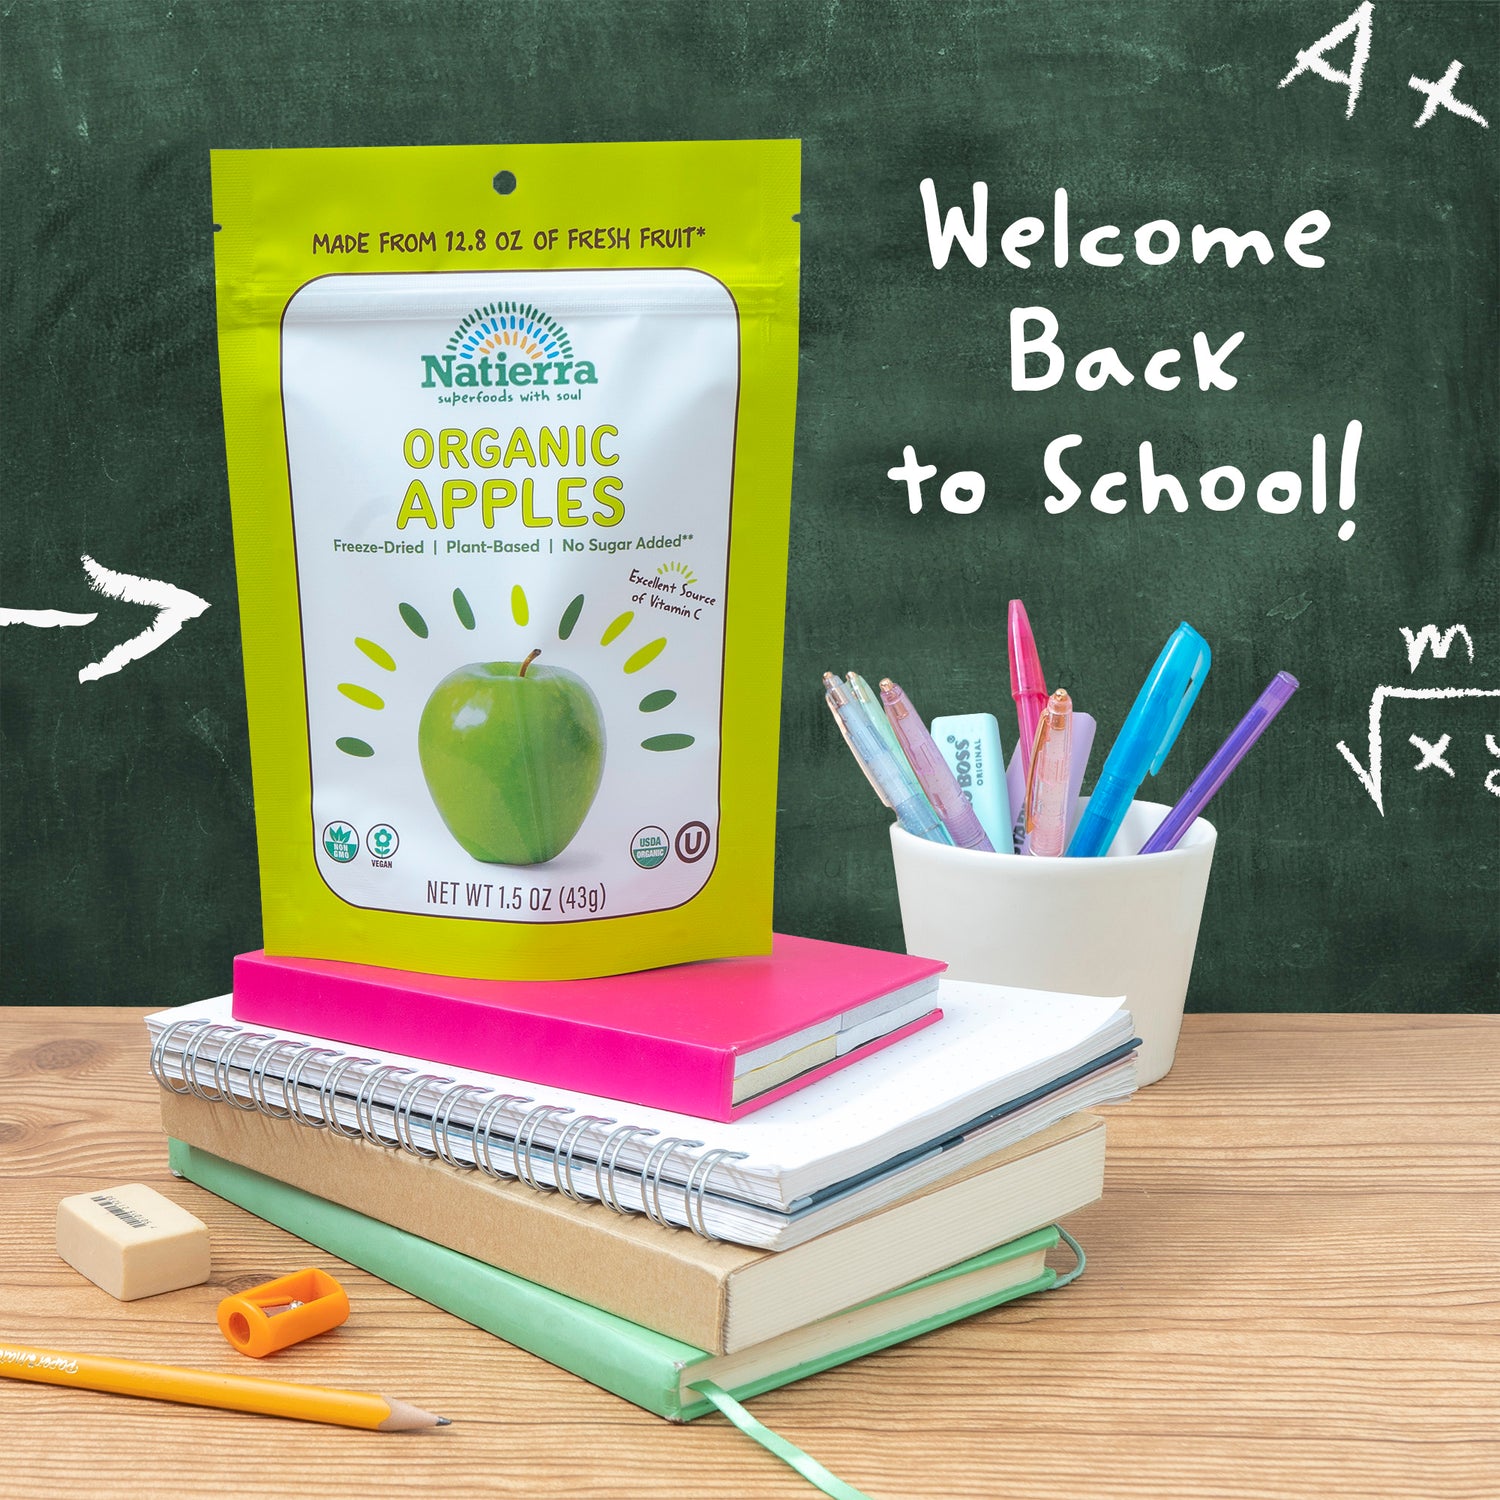 Re-vamp your back-to-school nutrition